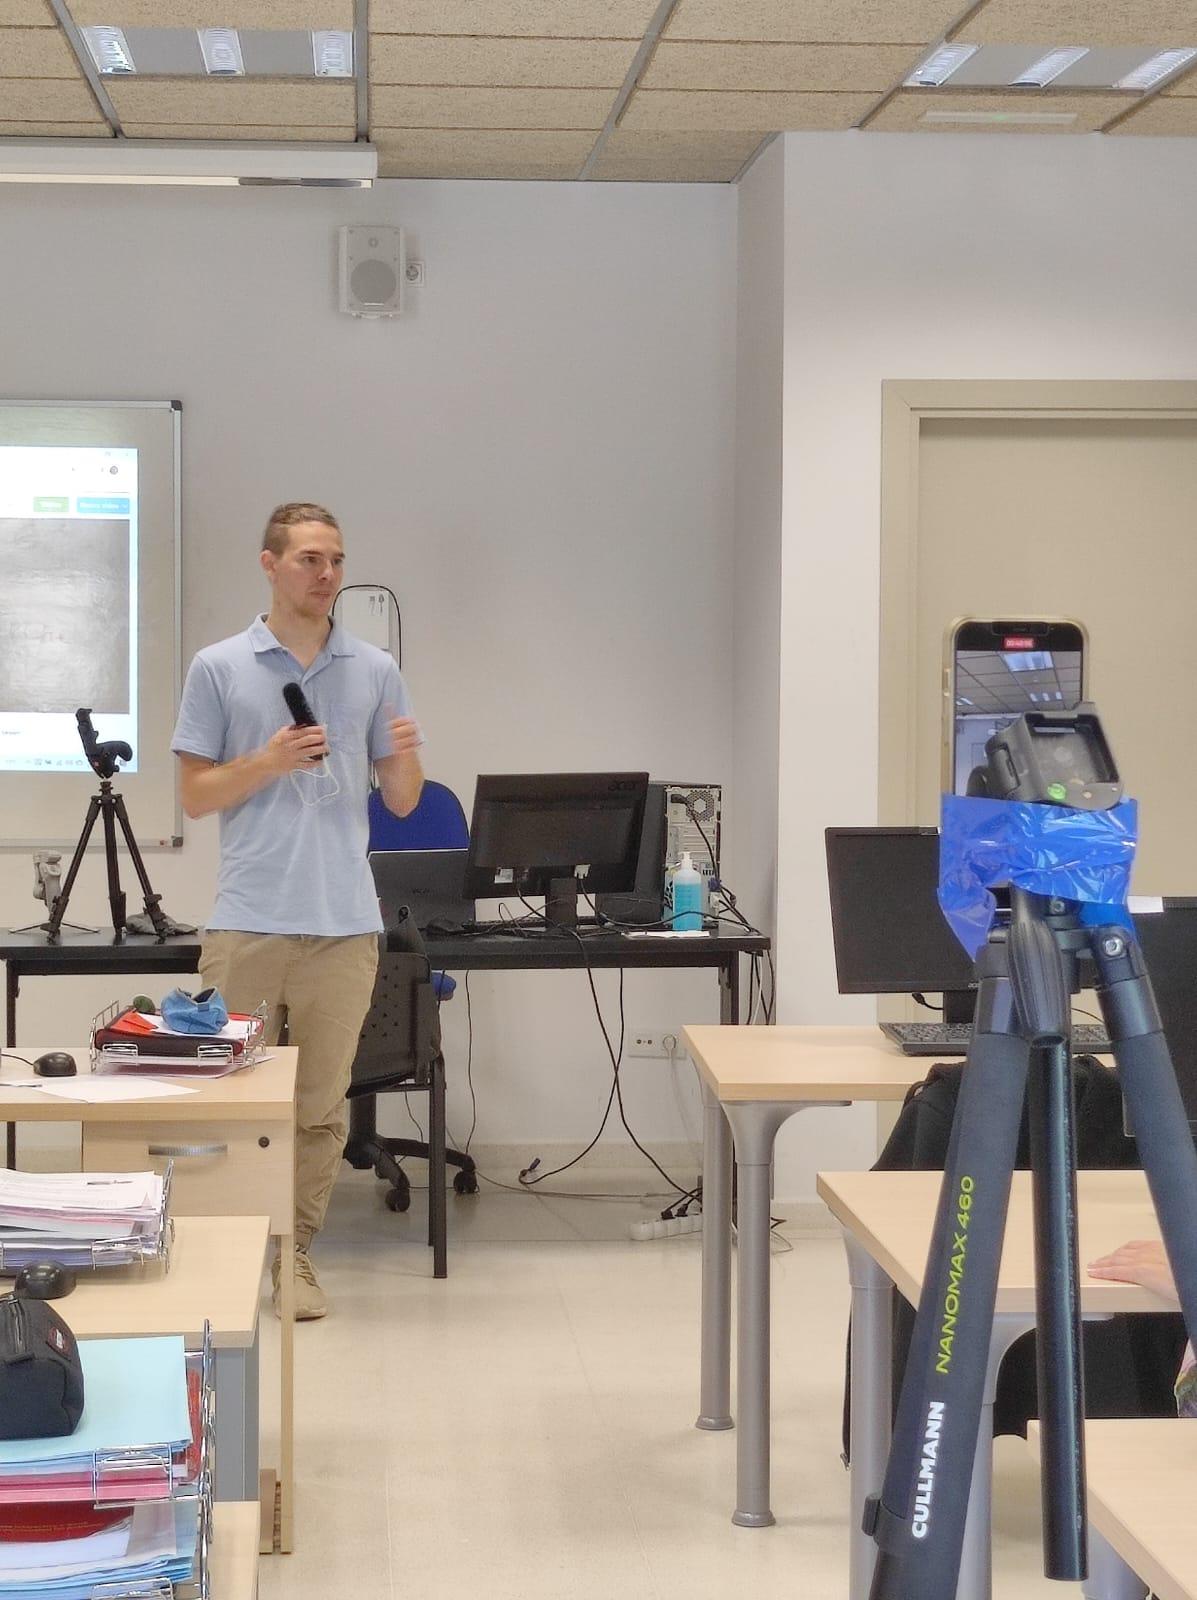 Colby Theriault Smith  gives a workshop on filming with smartphones